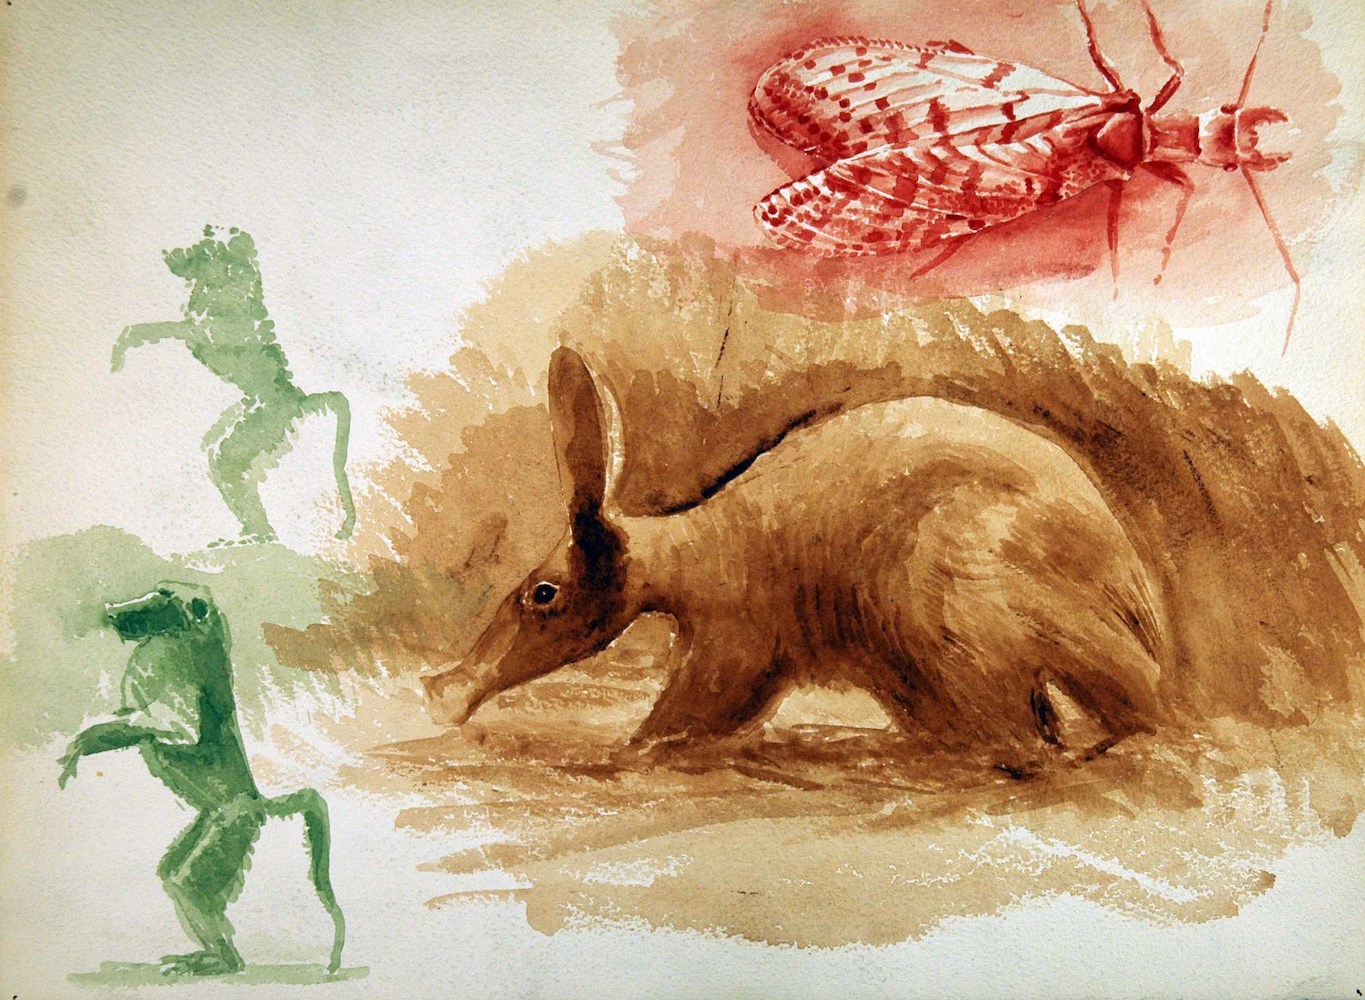 Two Baboons, one Aardvark and an Insect